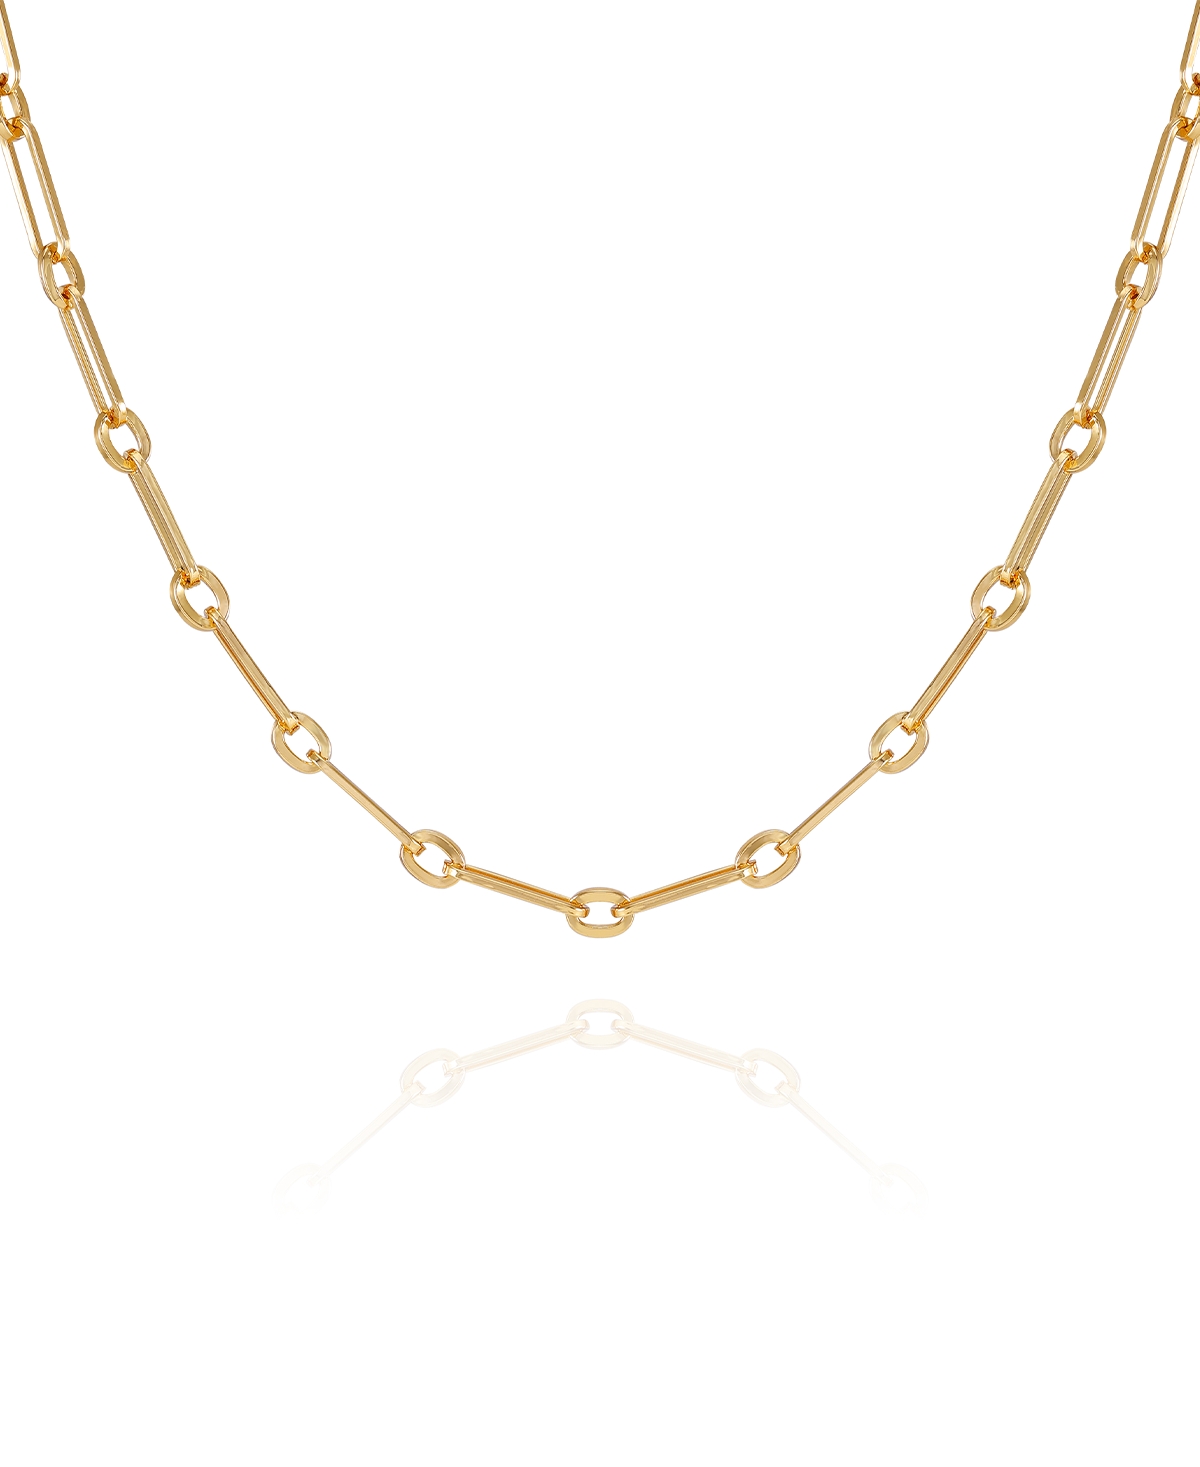 Gold-Tone Link Chain Necklace - Gold